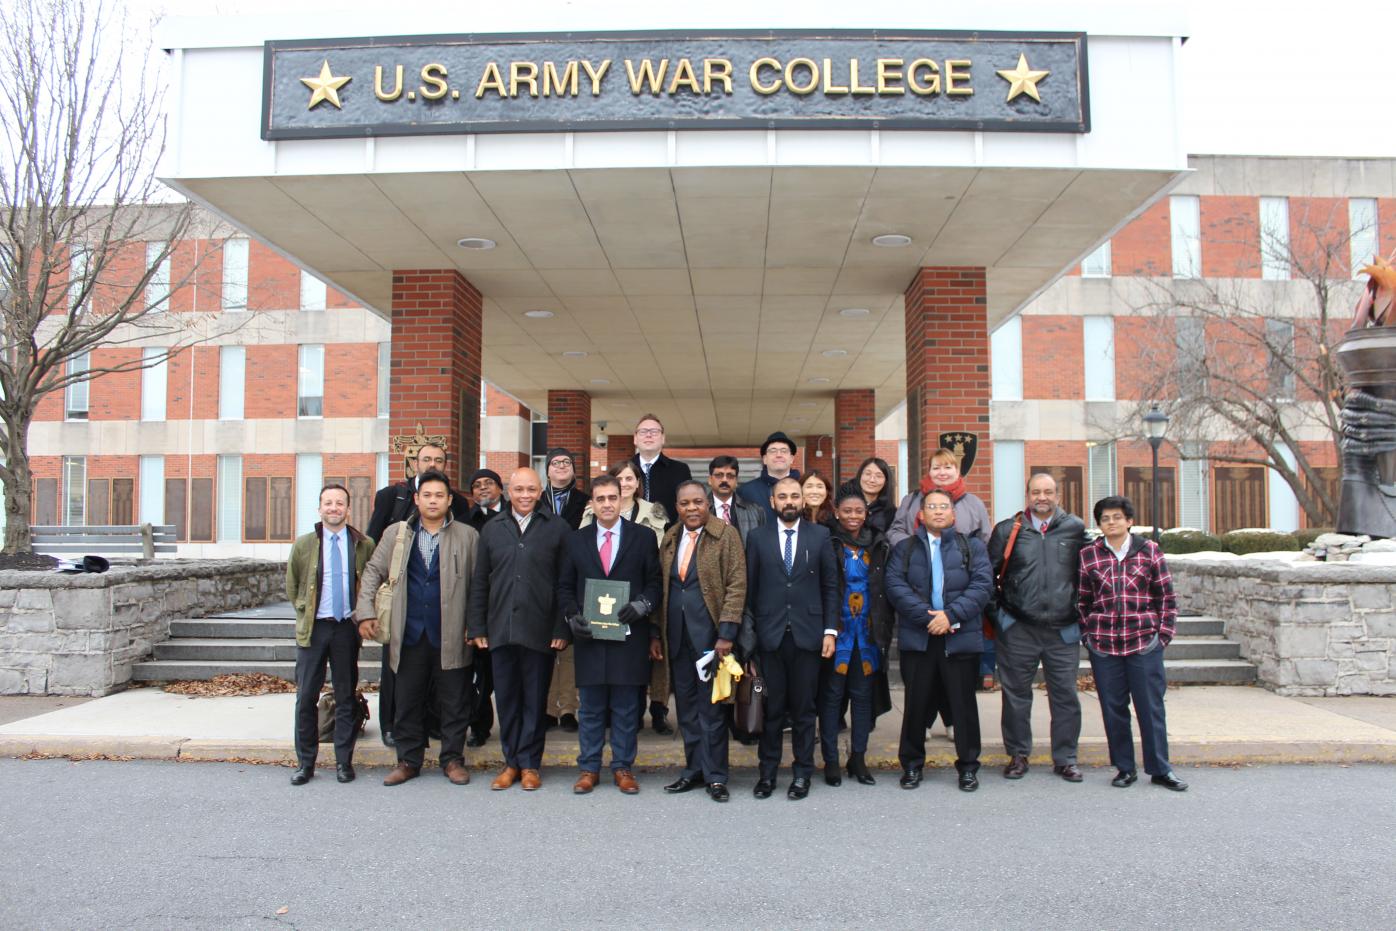 2019 Study of the U.S. Institute for Scholars on National Security Policy Making Participants at U.S. Army War College